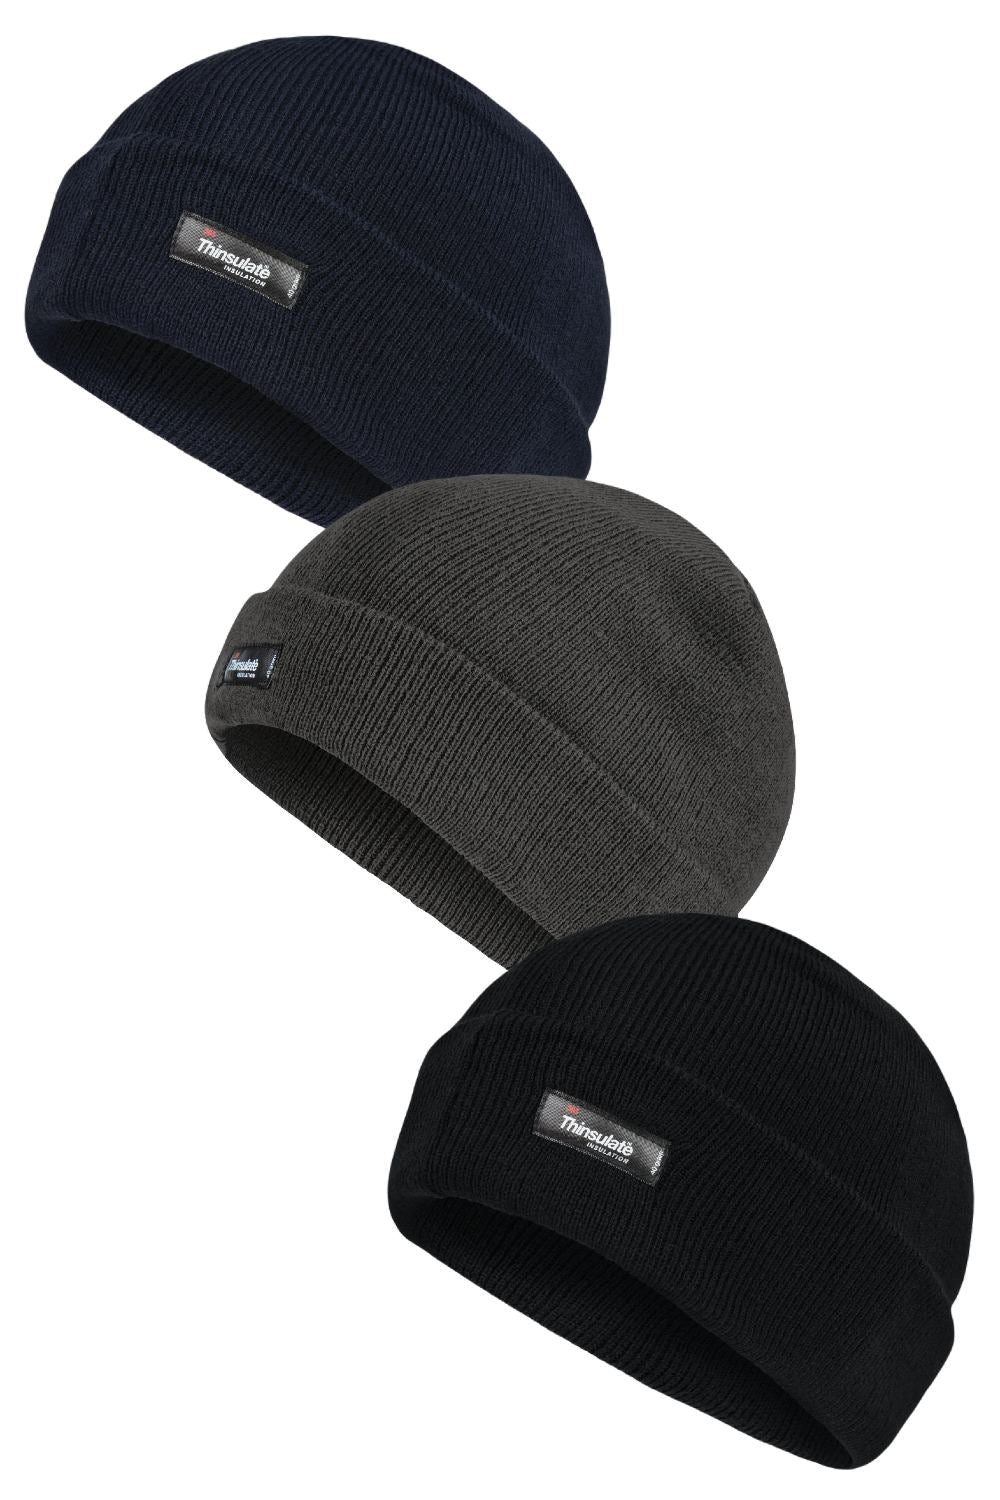 Regatta Thinsulate Acrylic Hat Navy, Seal and Black Regatta Thinsulate Acrylic Knit Hat 